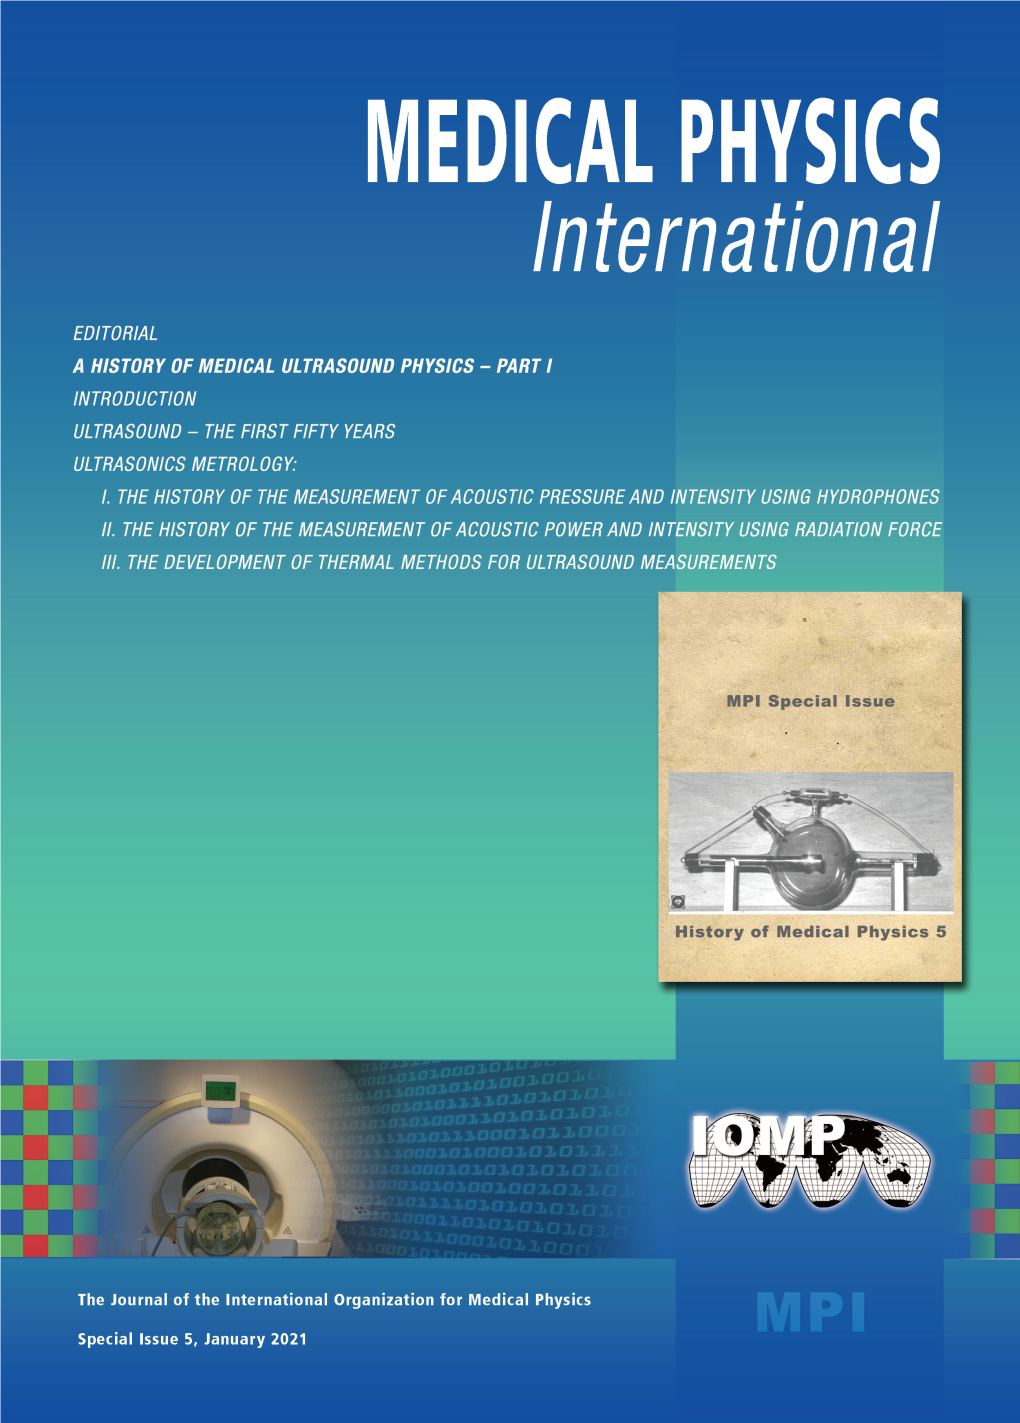 Special Issue, History of Medical Physics 5, 2020